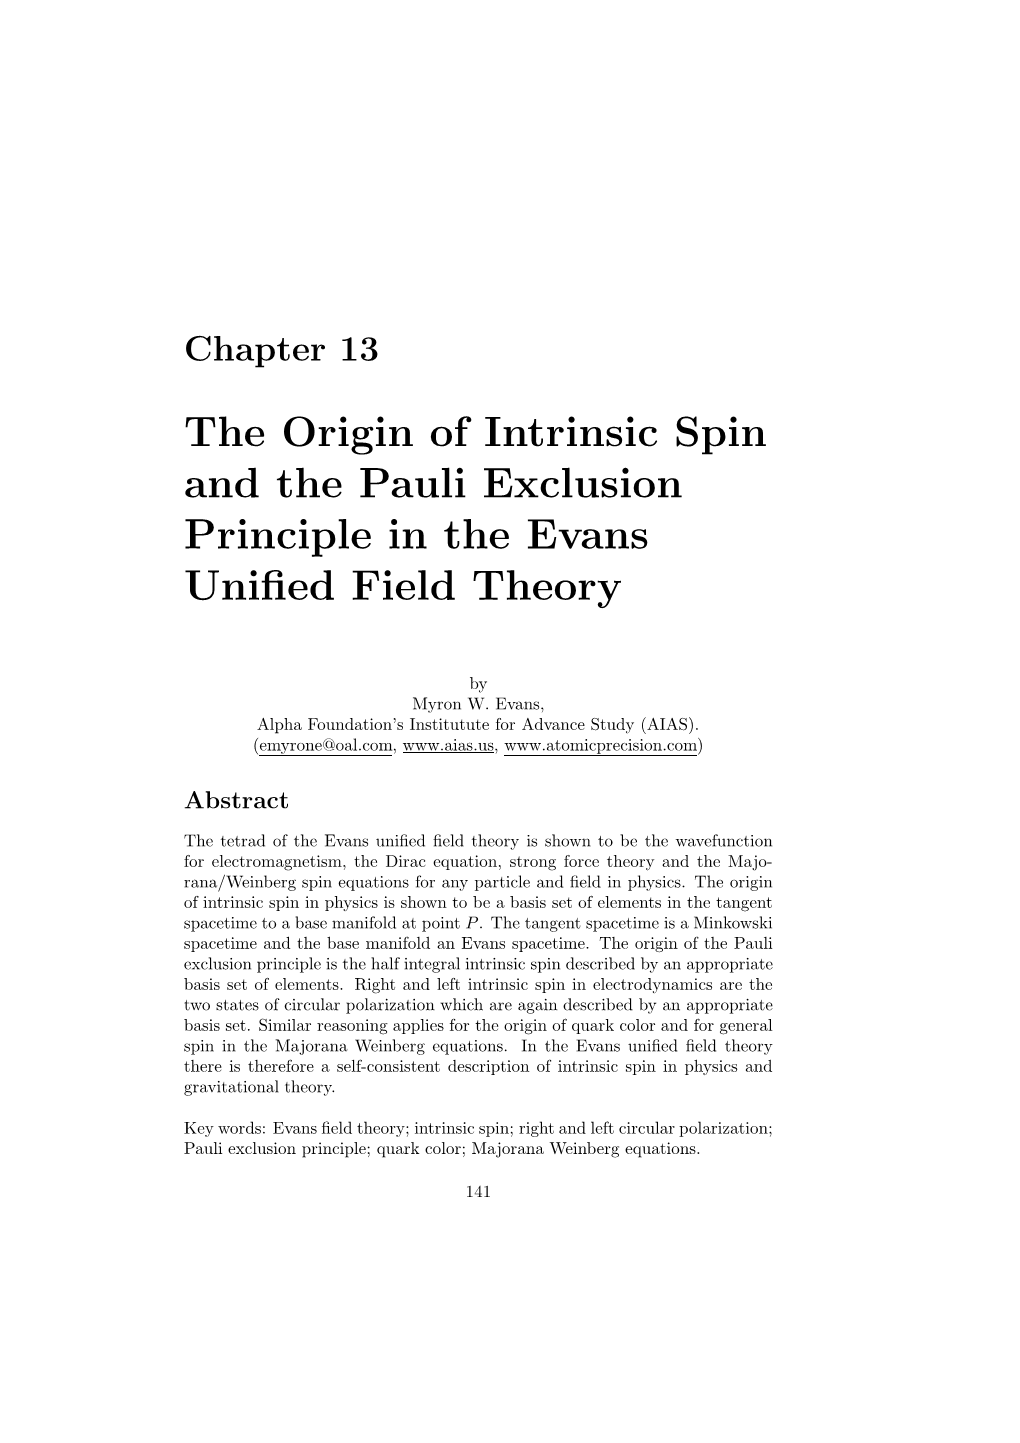 The Origin of Intrinsic Spin and the Pauli Exclusion Principle in the Evans Uniﬁed Field Theory